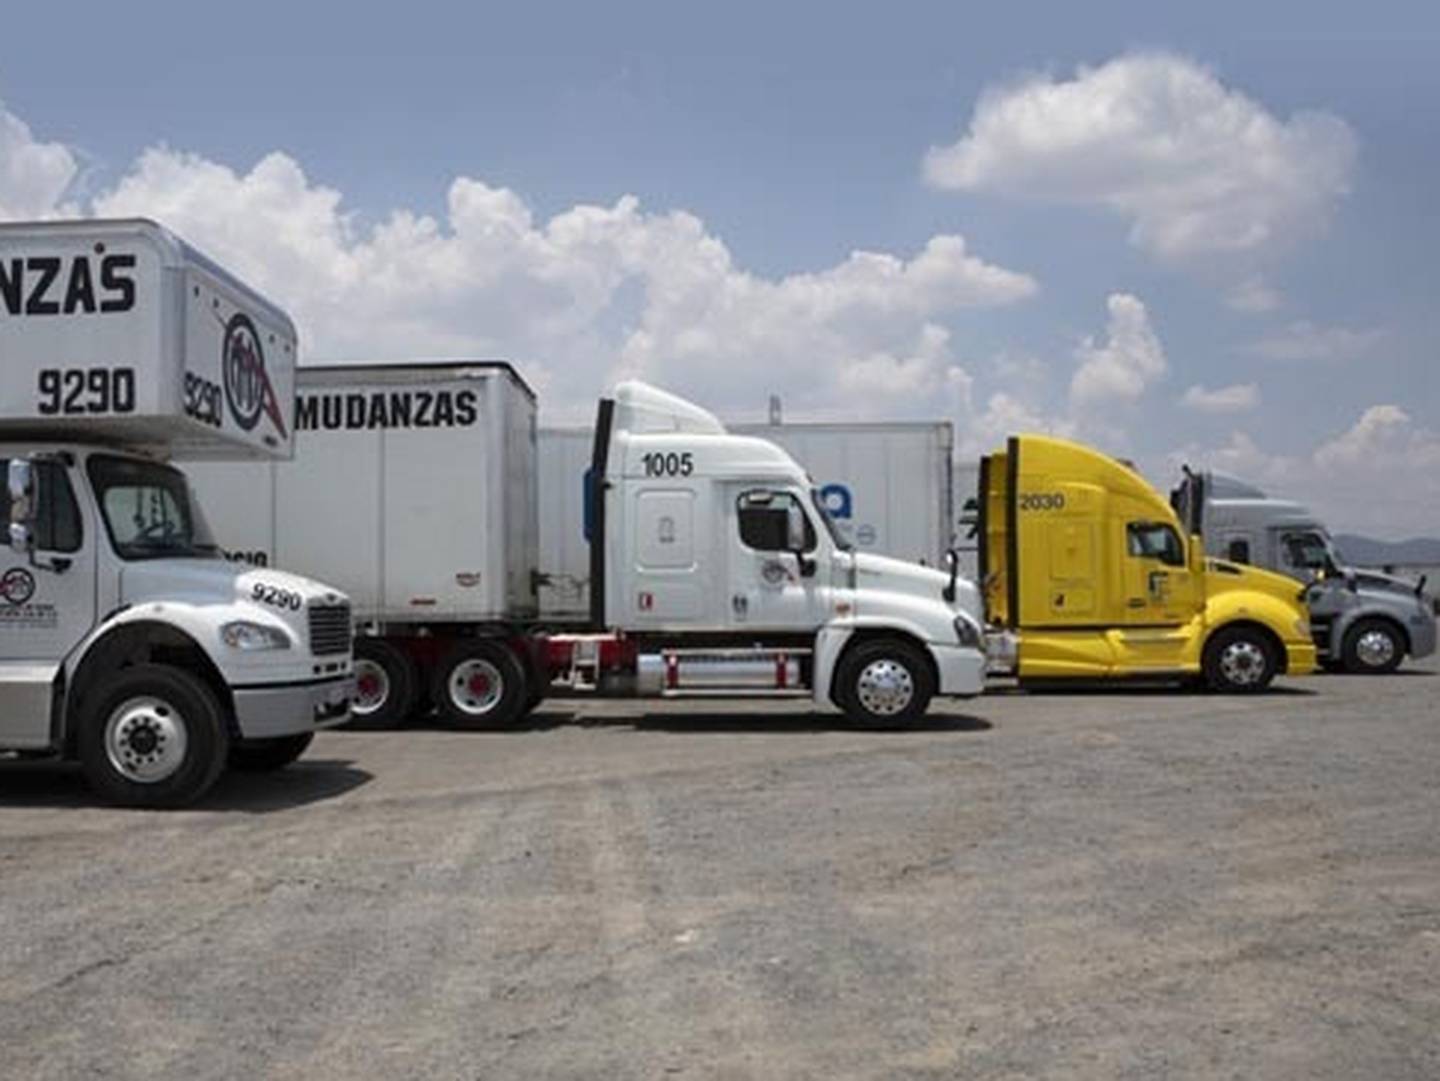 The Mexican haulage and logistics company hopes to recover its pre-pandemic growth rate in 2022.